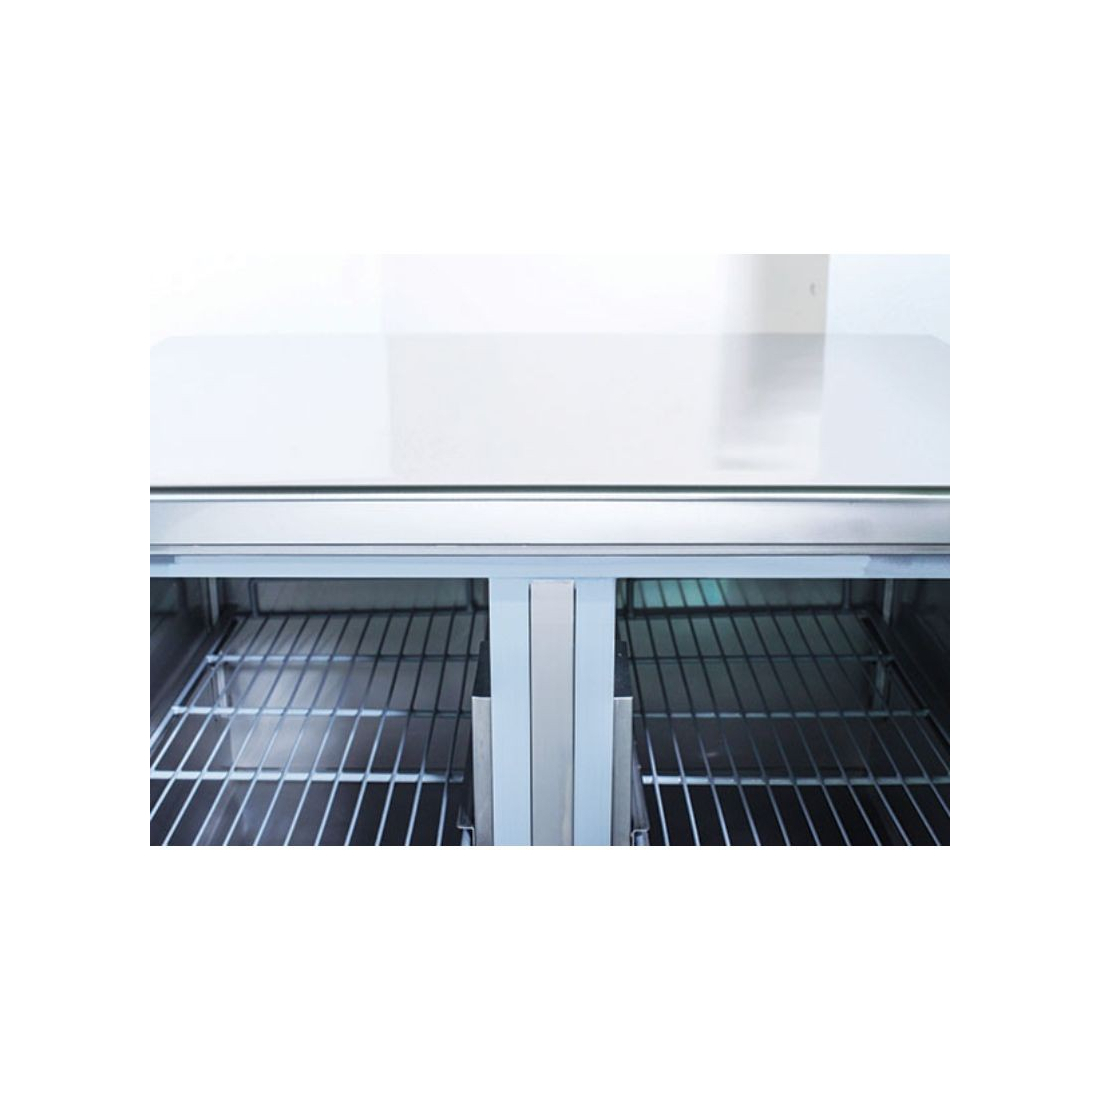 COOL HEAD ,CRS90A, Pizza & Sandwiches Preparation Chiller With Two Doors And Steel Worktop - Depth 70 cm|mkayn|مكاين